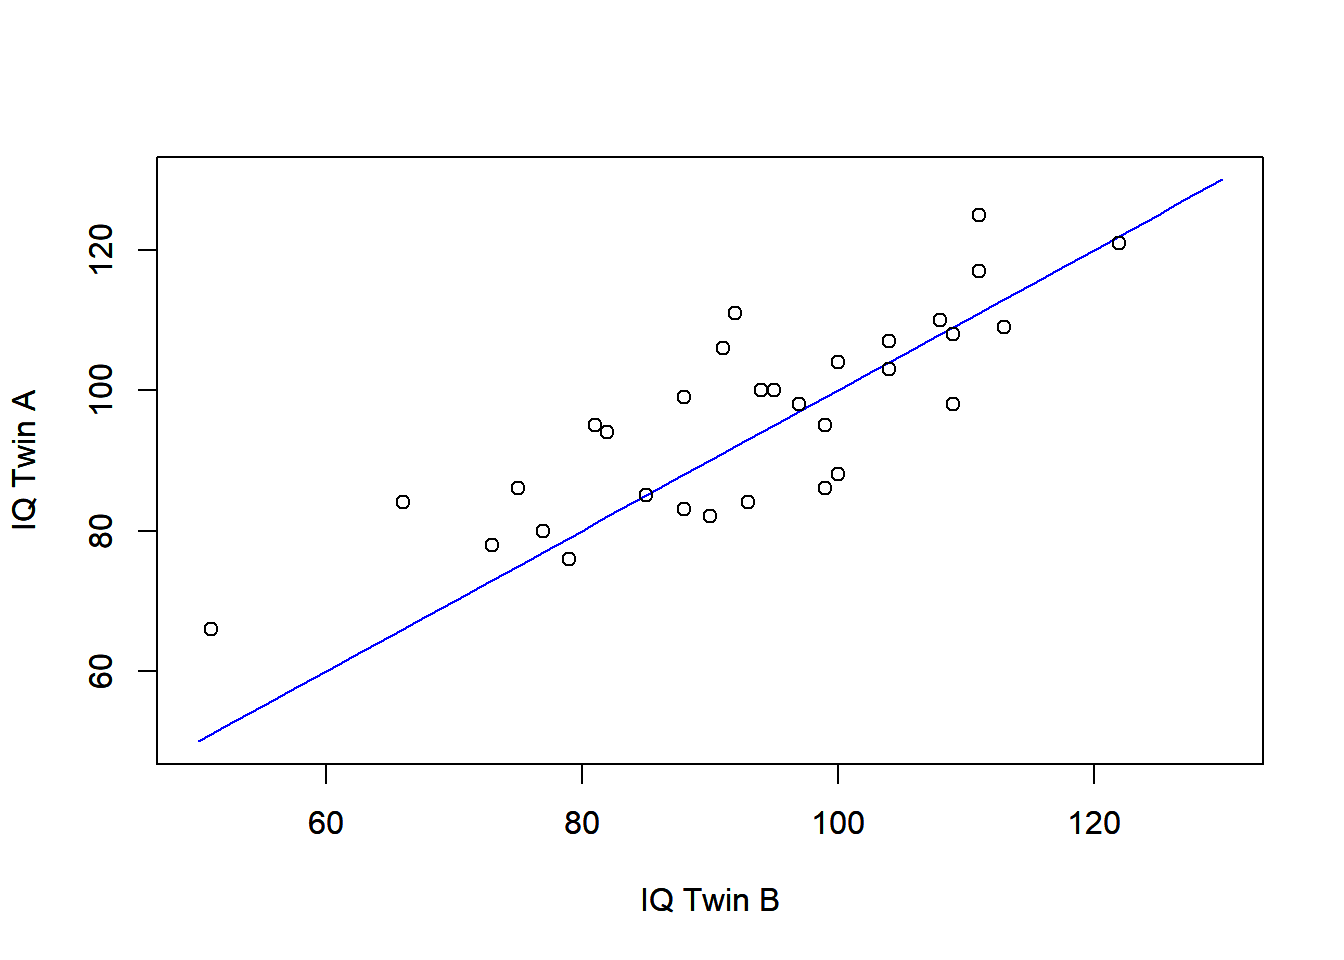 Plot of IQ scores for pairs of twins